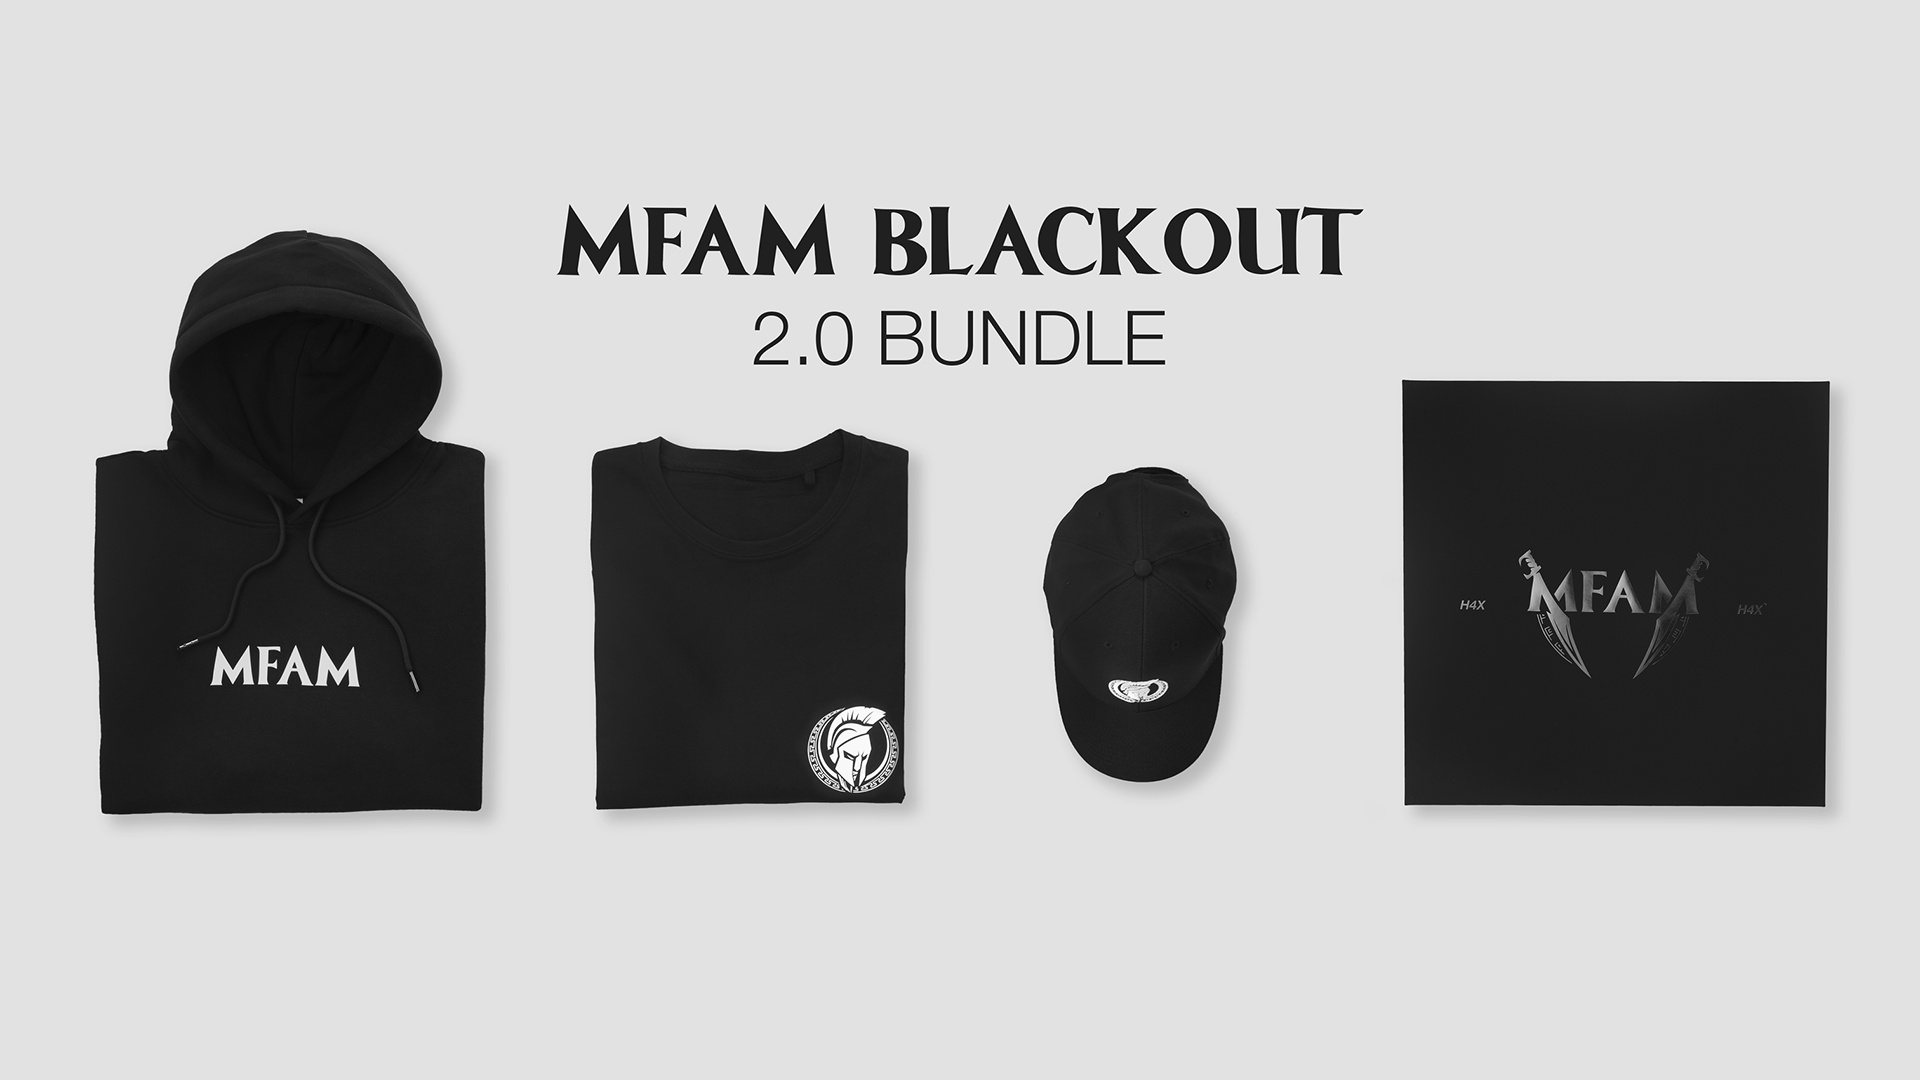 H4X PARTNERS WITH NICKMERCS MFAM FOR BLACKOUT 2.0 COLLECTION